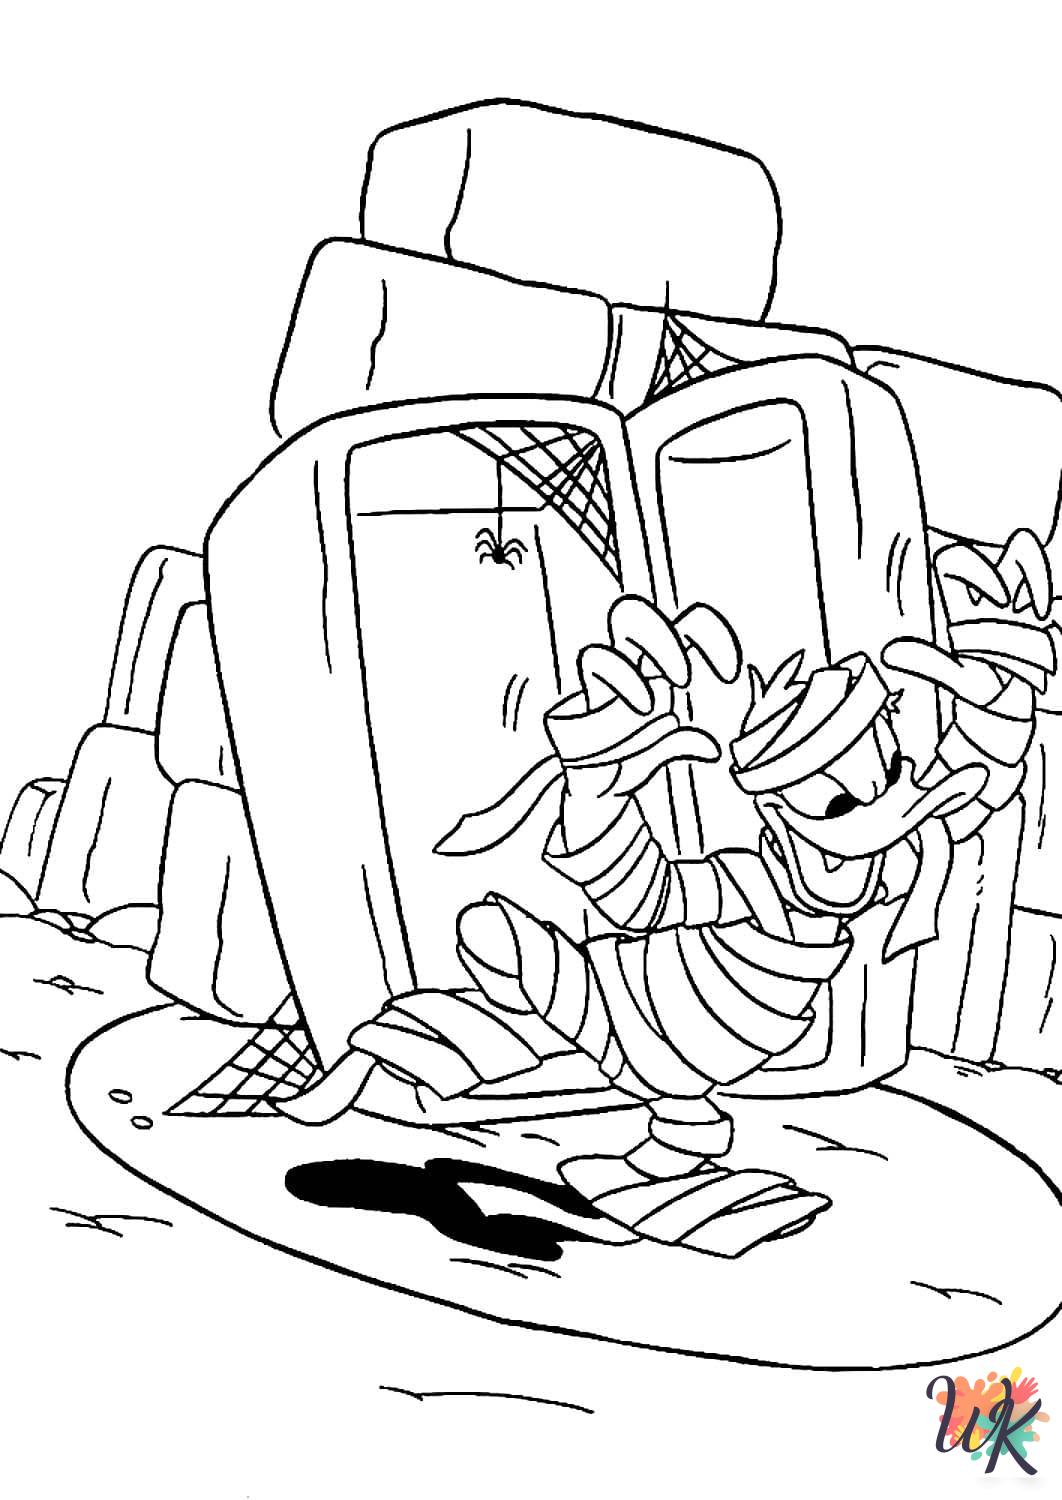 Mummy coloring pages for adults easy